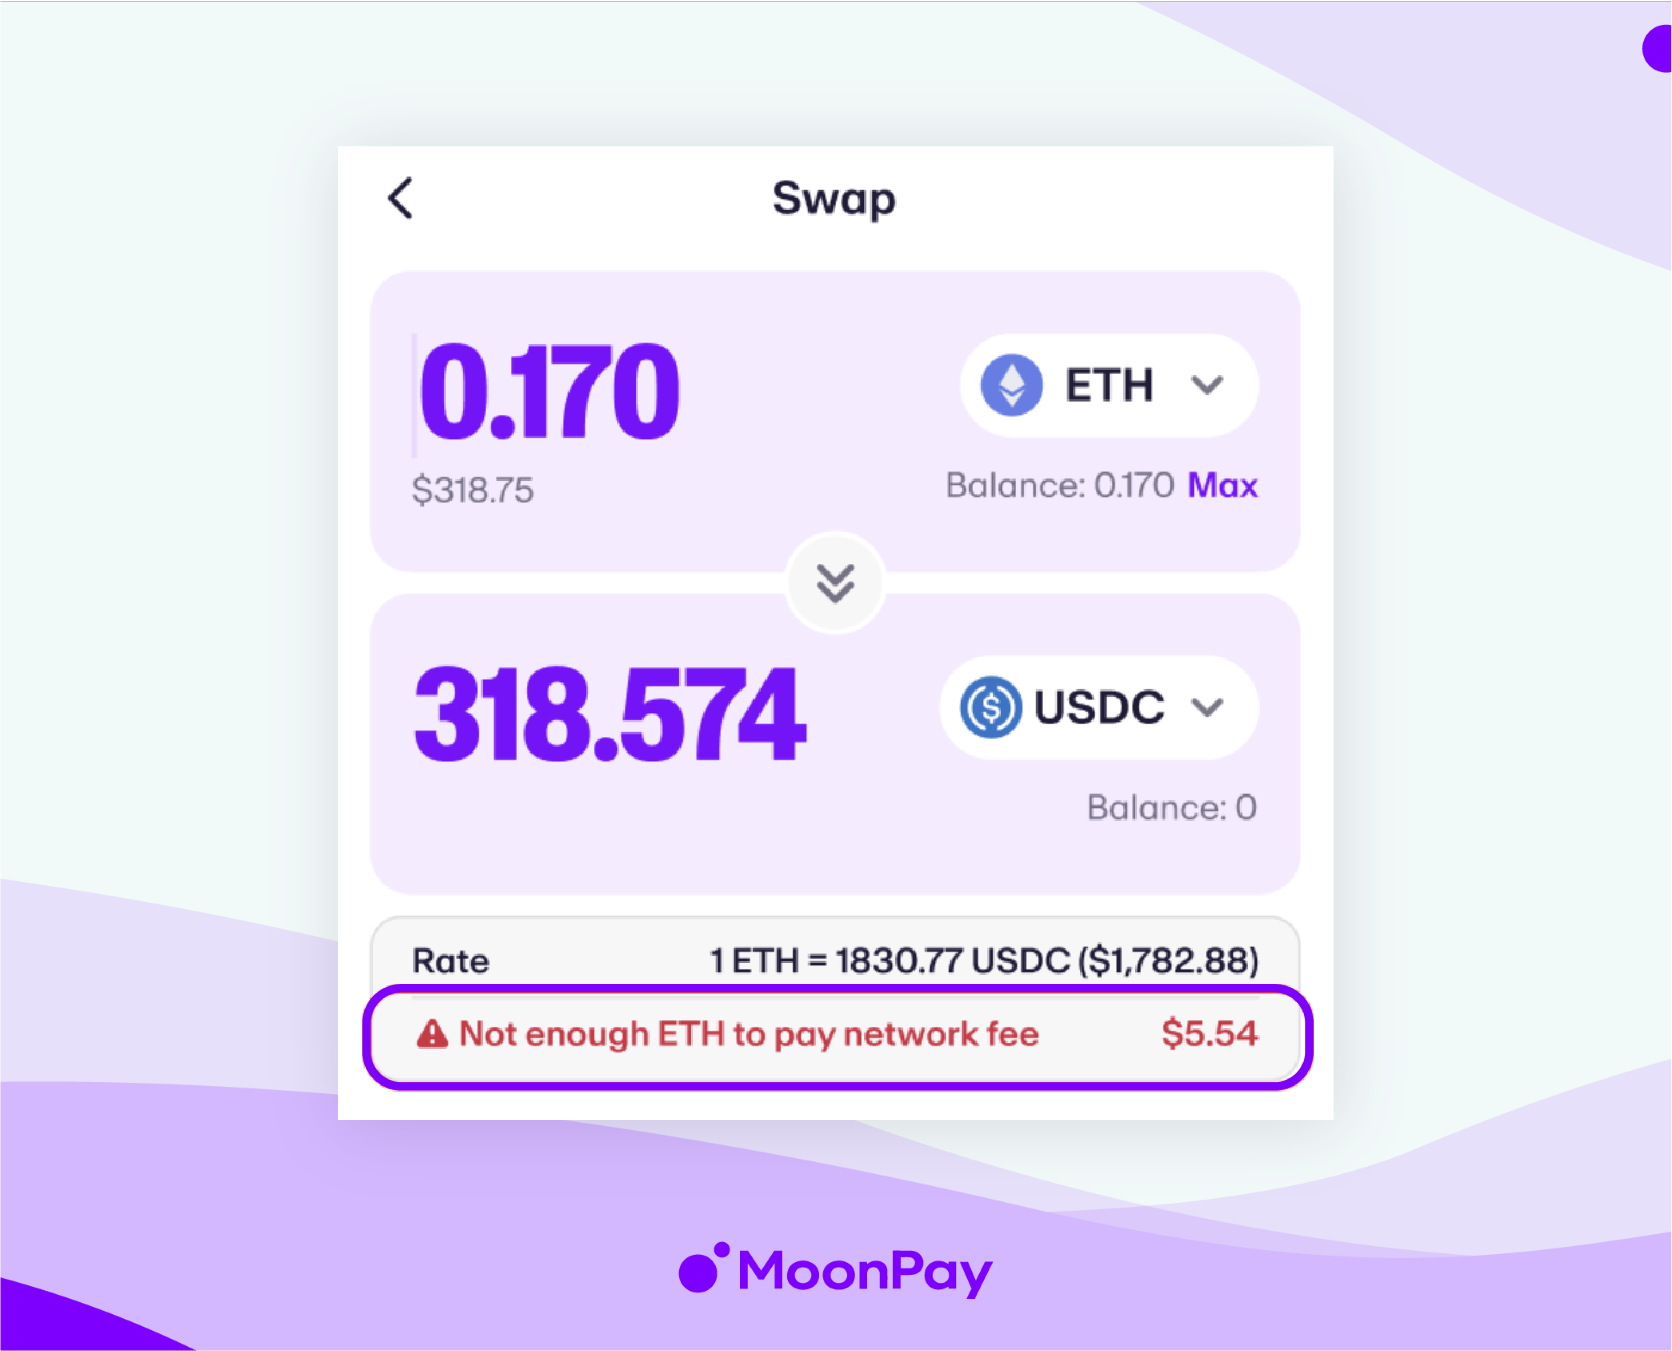 MoonPay's app window shows inadequate funds to cover the transaction.